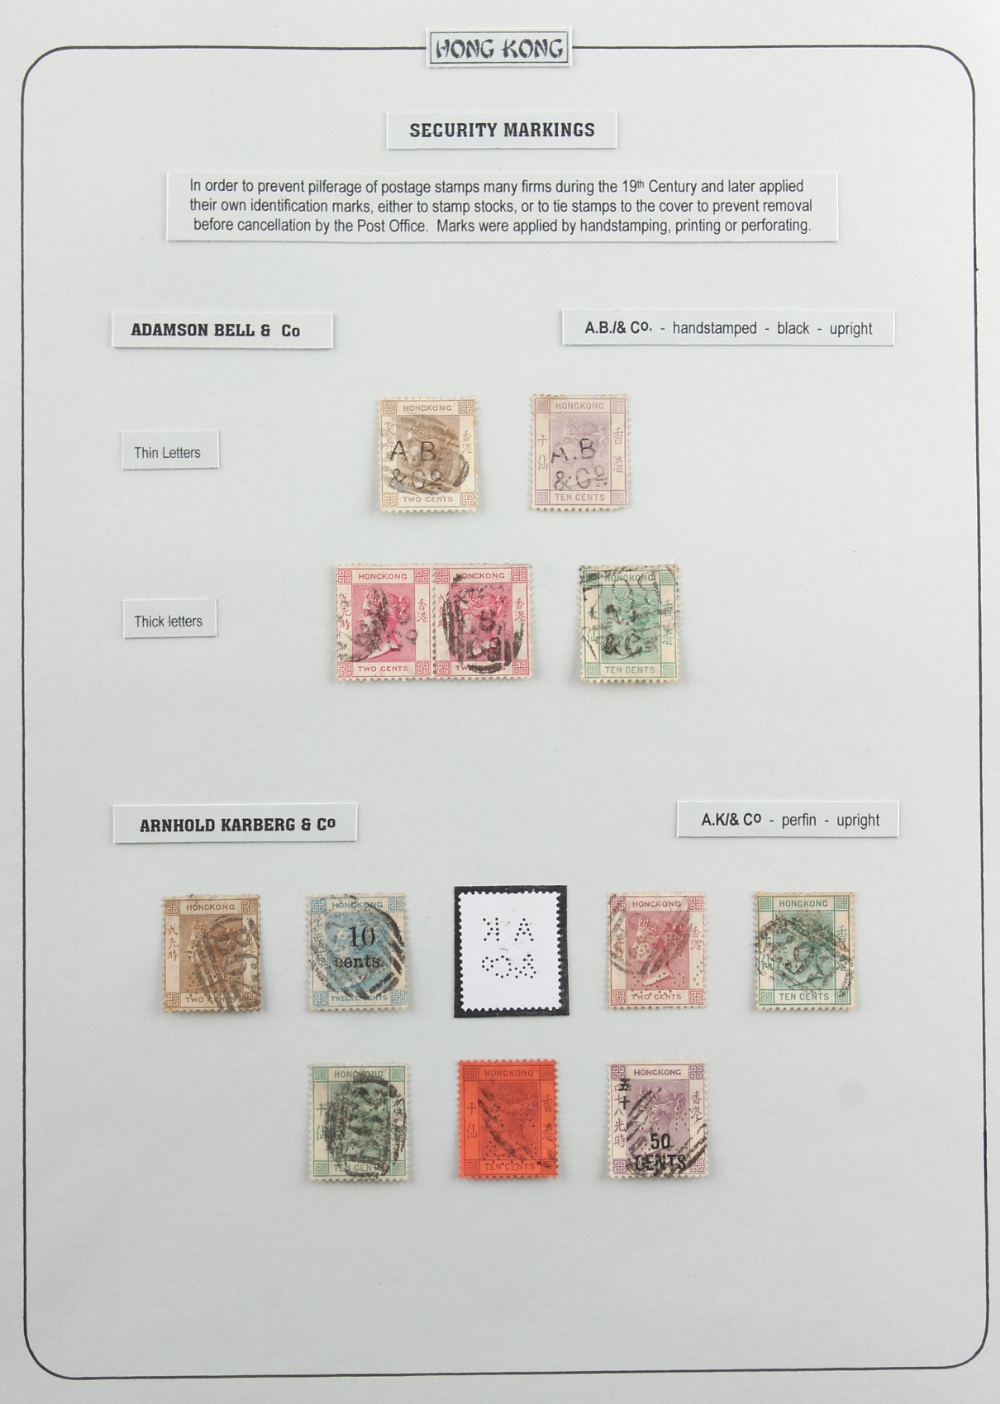 The Basil Lewis (1927-2019) collection of stamps - Hong Kong: Perfins and Security handstamps, a